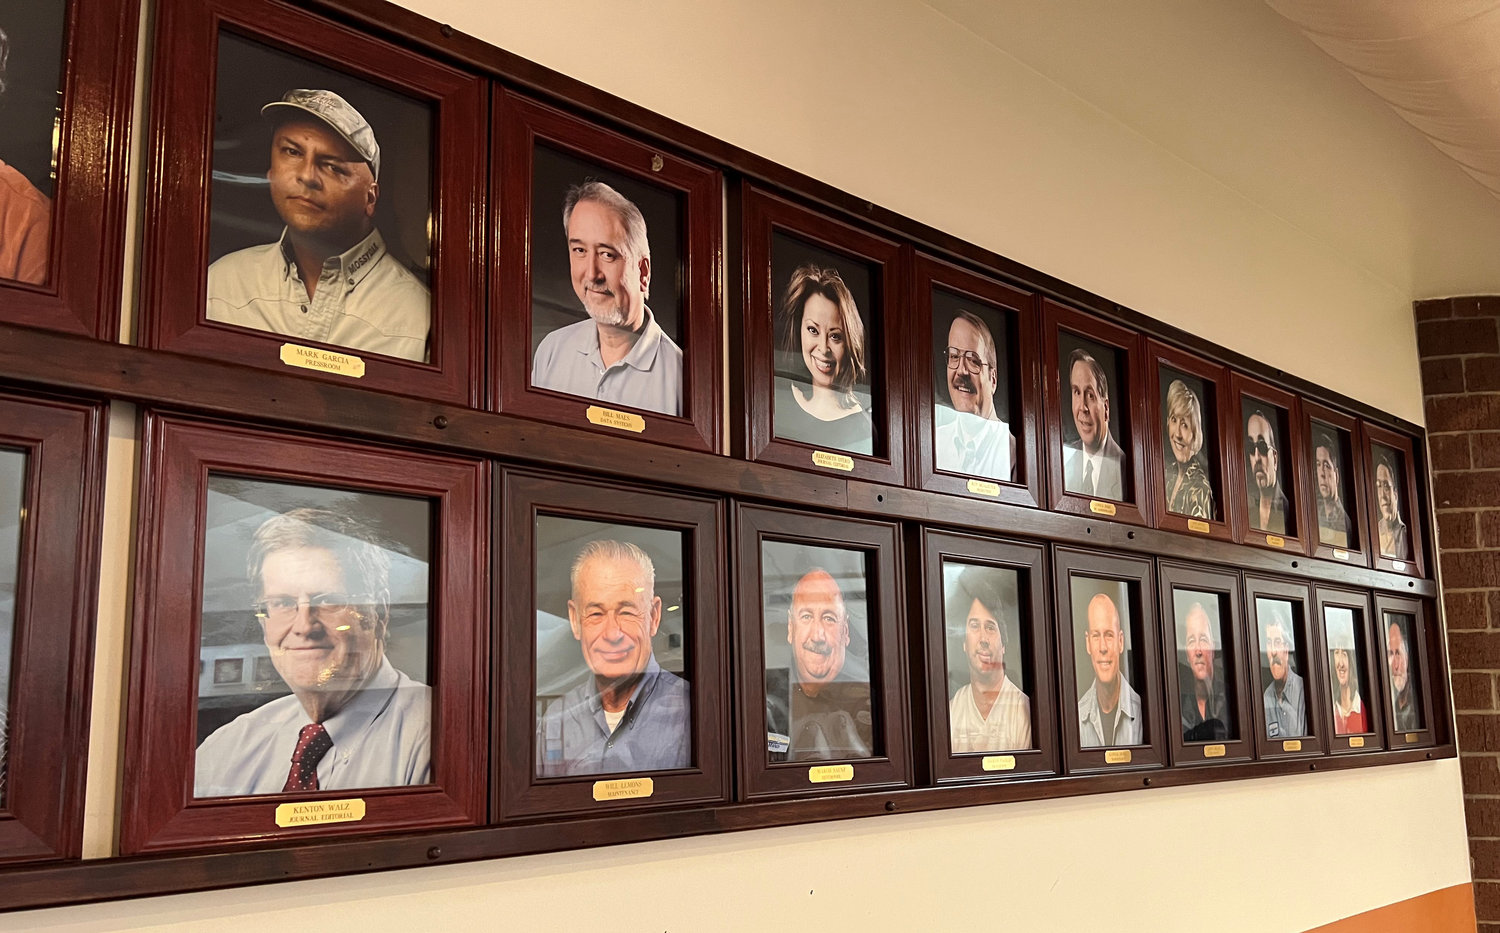 Robert Rivera: "We have had many employees who have spent their entire working lives with this company. We are family owned and operated by the Lang family who are very hands on and appreciate their employees. After 25 years of employment, they gift employees with a Rolex watch and hang their picture in our cafeteria to show their appreciation."